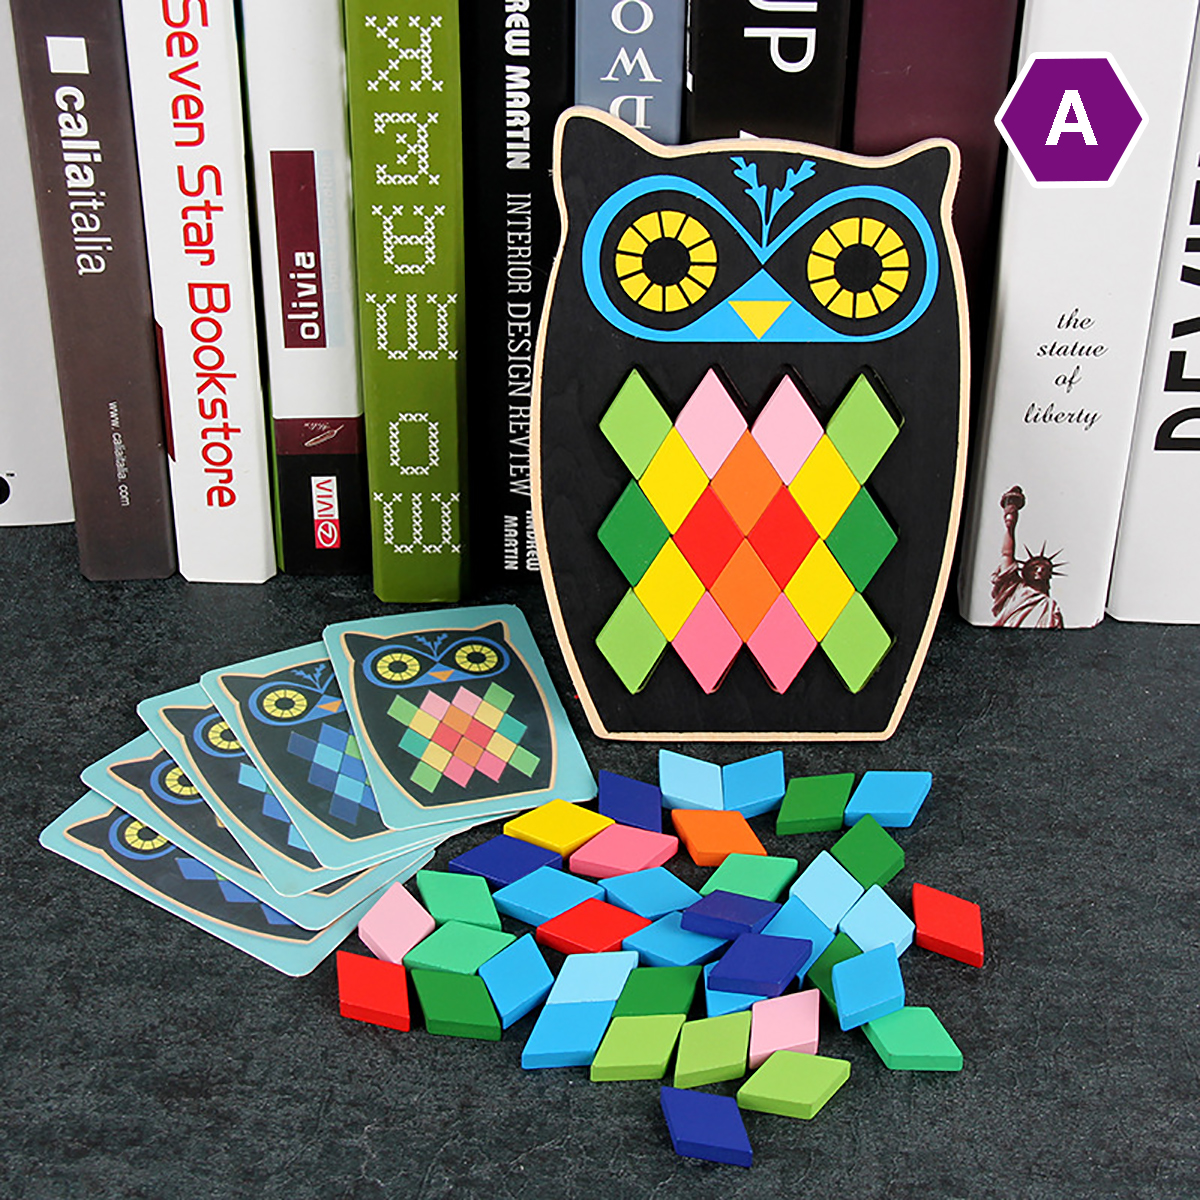 Wood-DIY-Assembly-Jigsaw-Puzzle-Toy-Colors-Shapes-Cartoon-Fish-Owl-Matching-Cards-Toy-for-Children-L-1682195-3